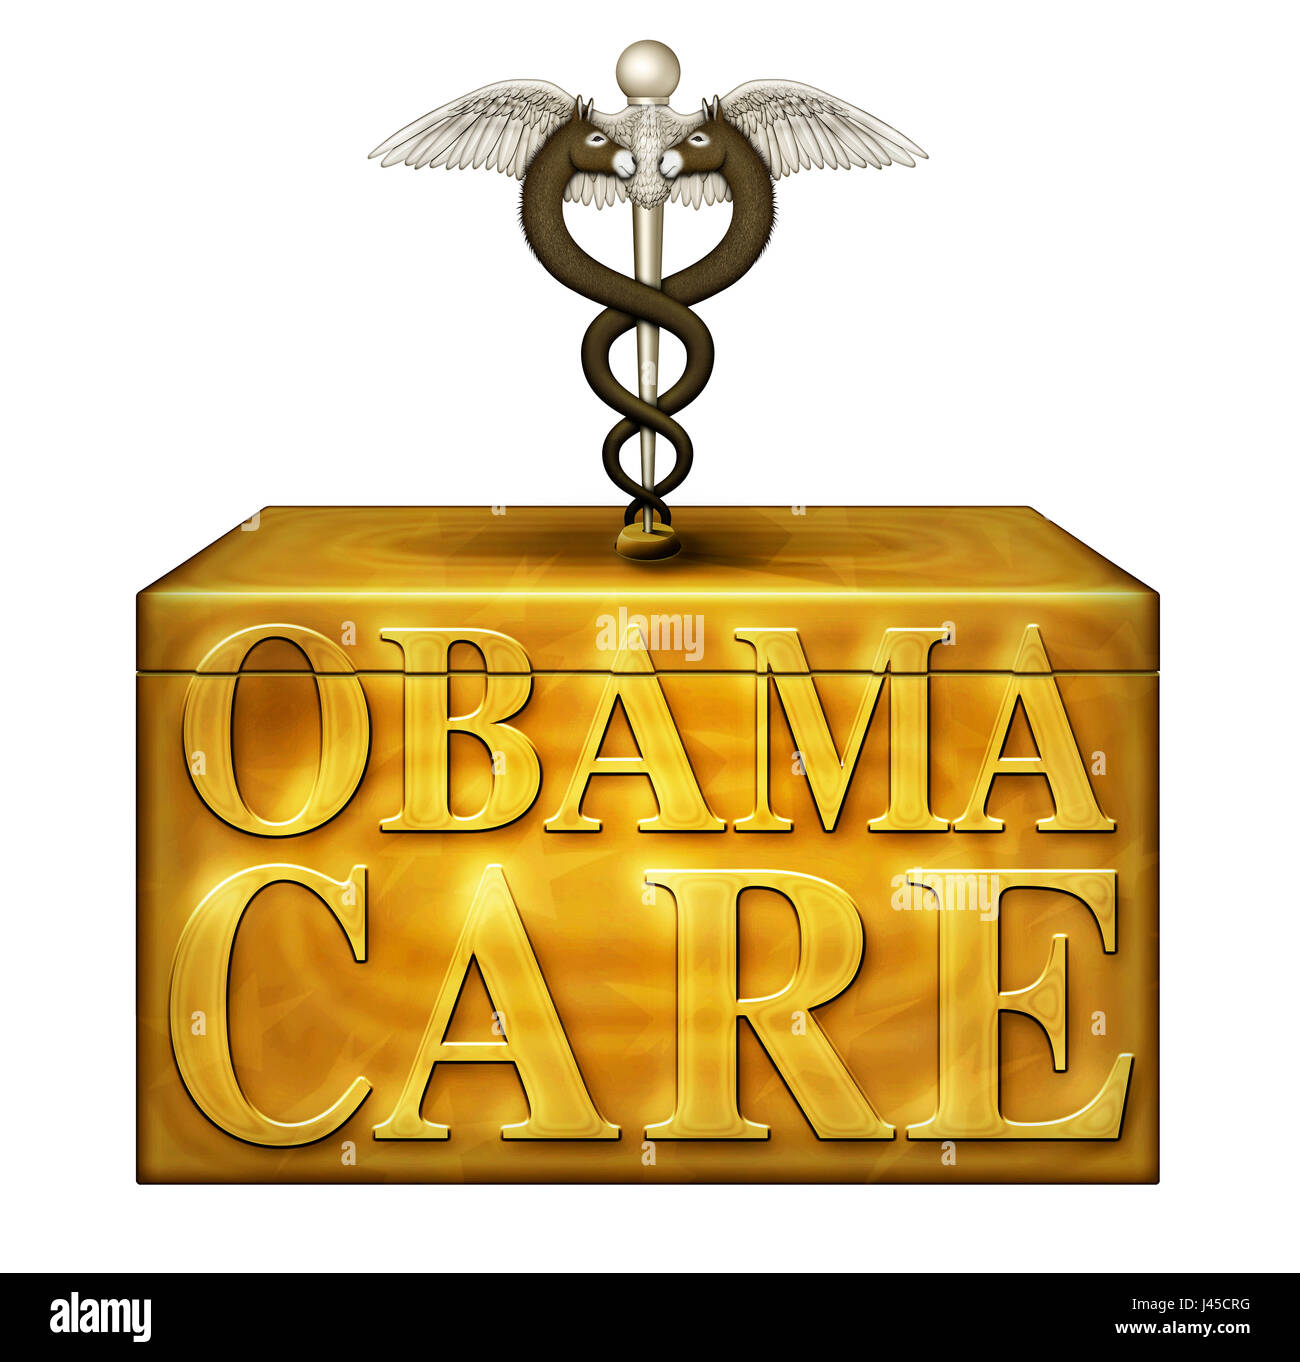 A golden box labeled Obamacare with a Caduceus, a symbol of medicine, on the lid representing Democrats. Stock Photo